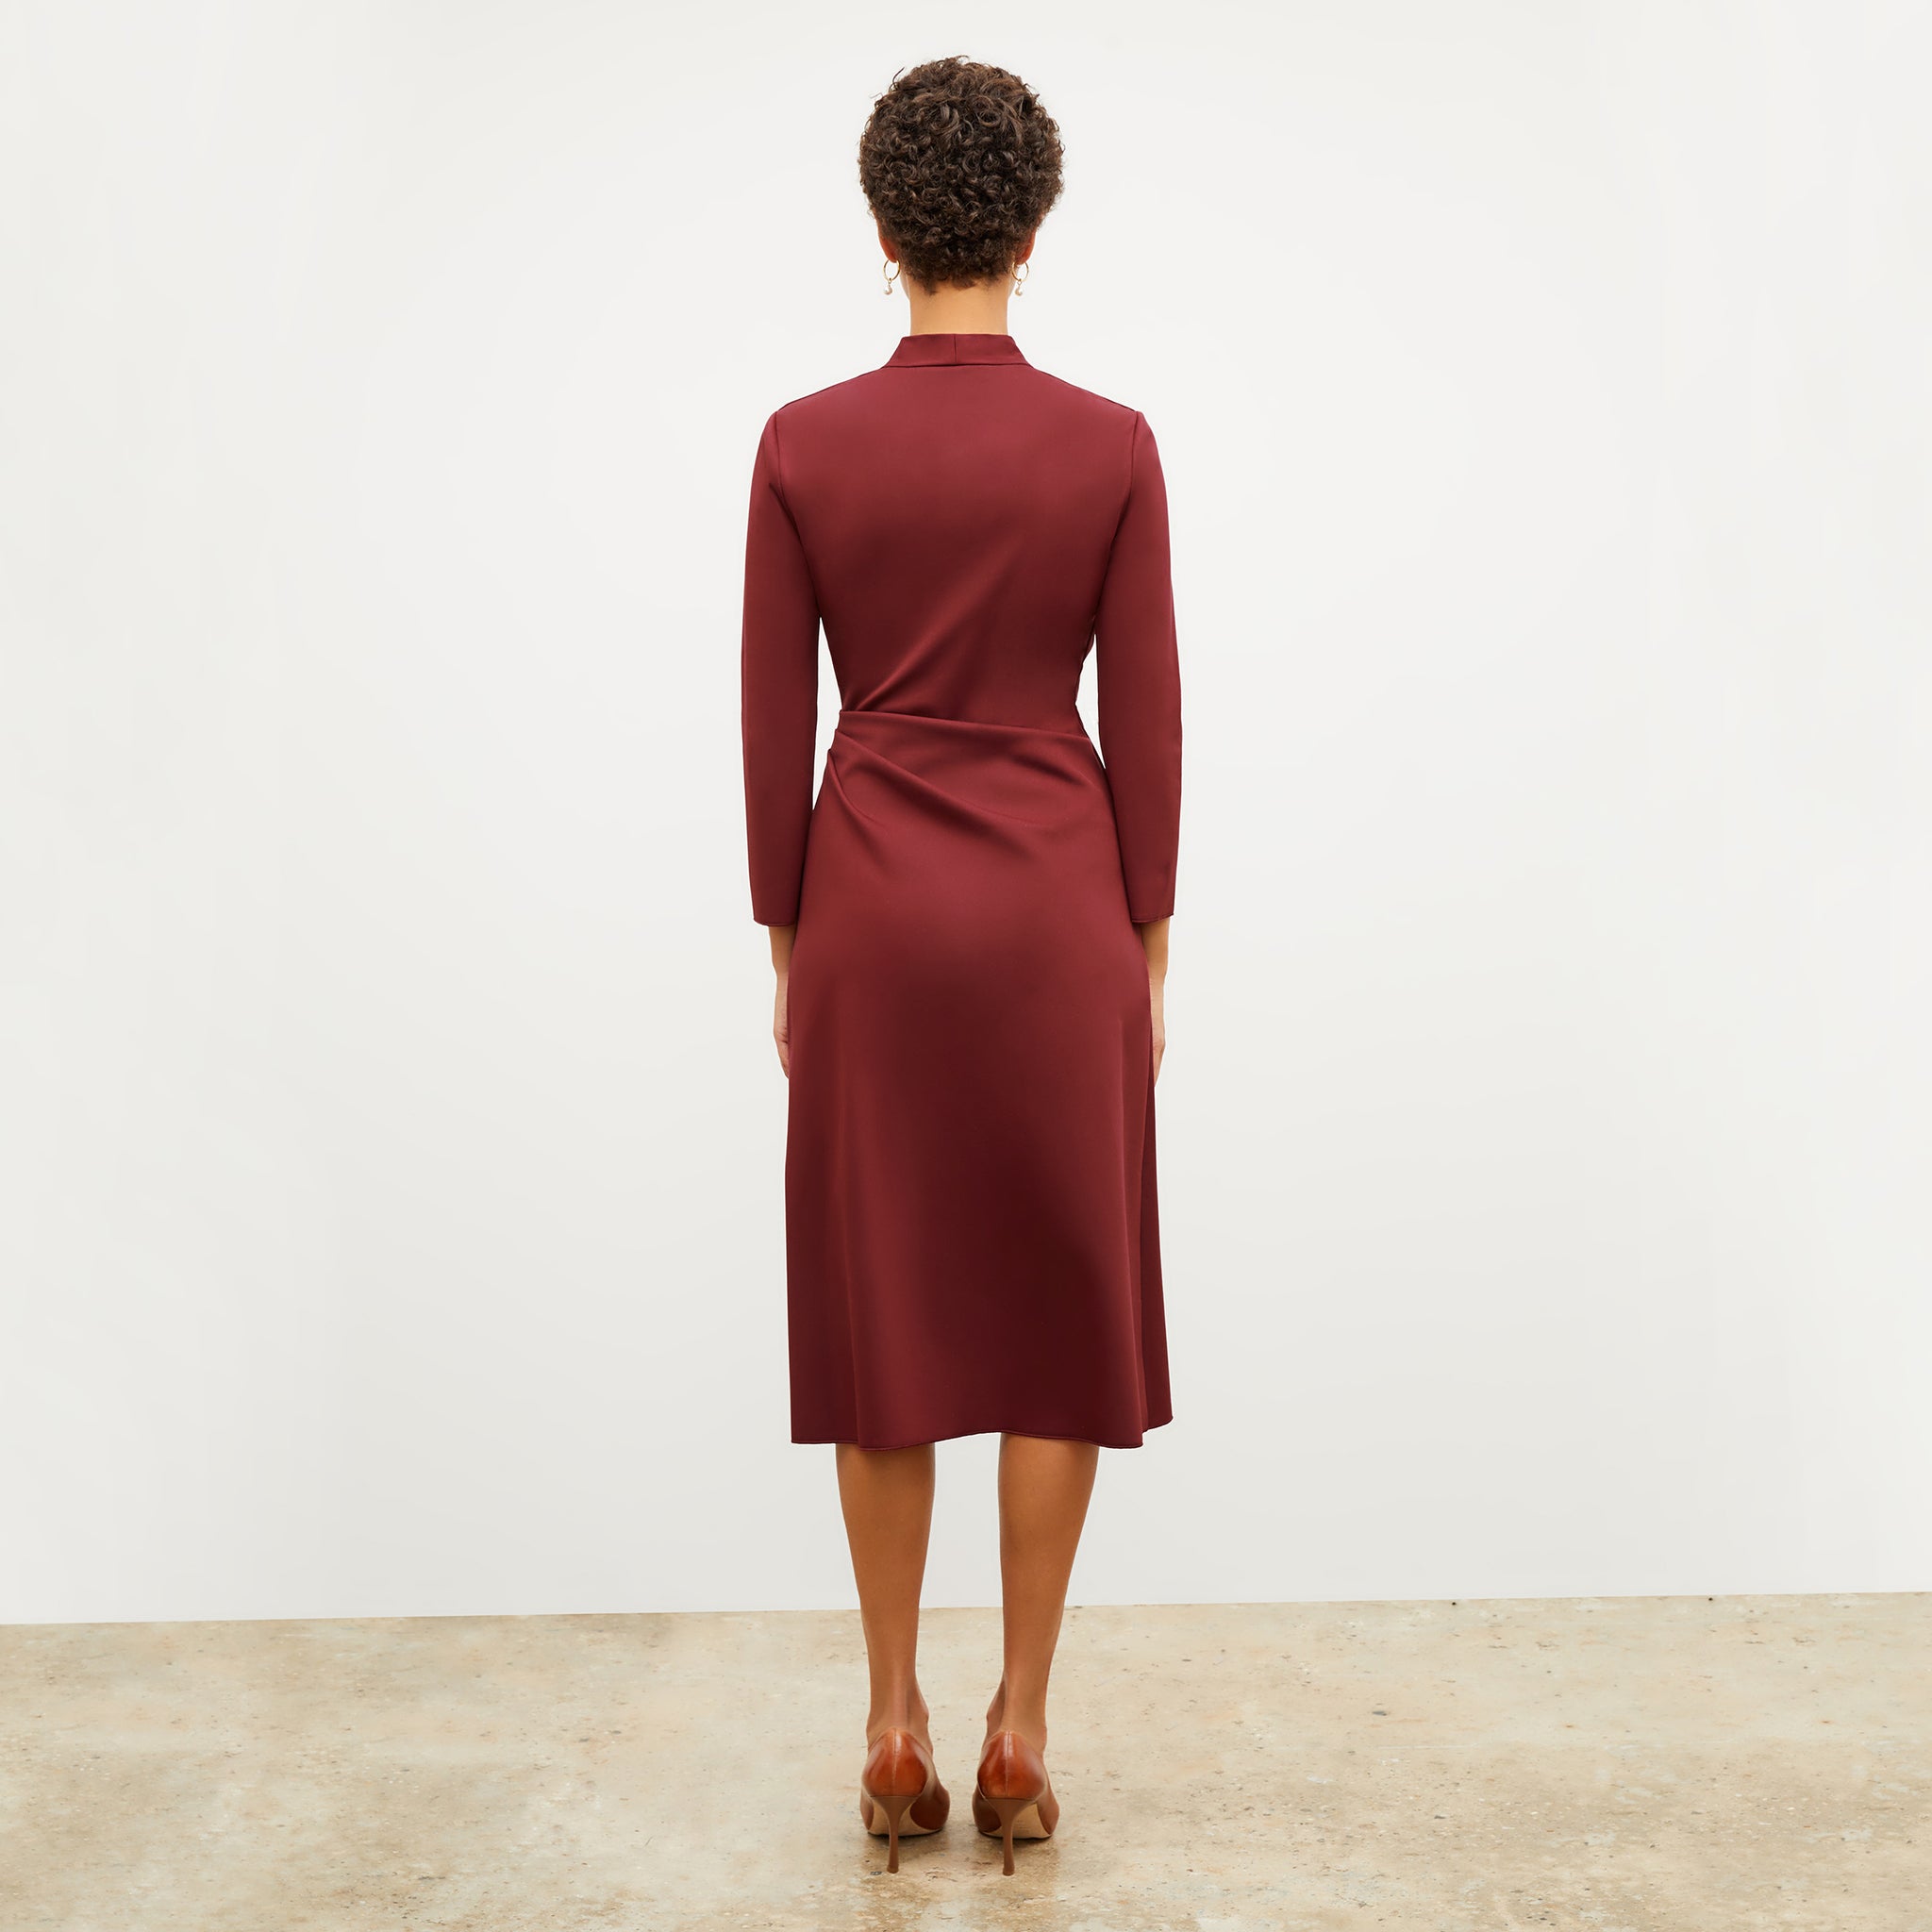 Back image of a woman wearing the carly dress in maroon